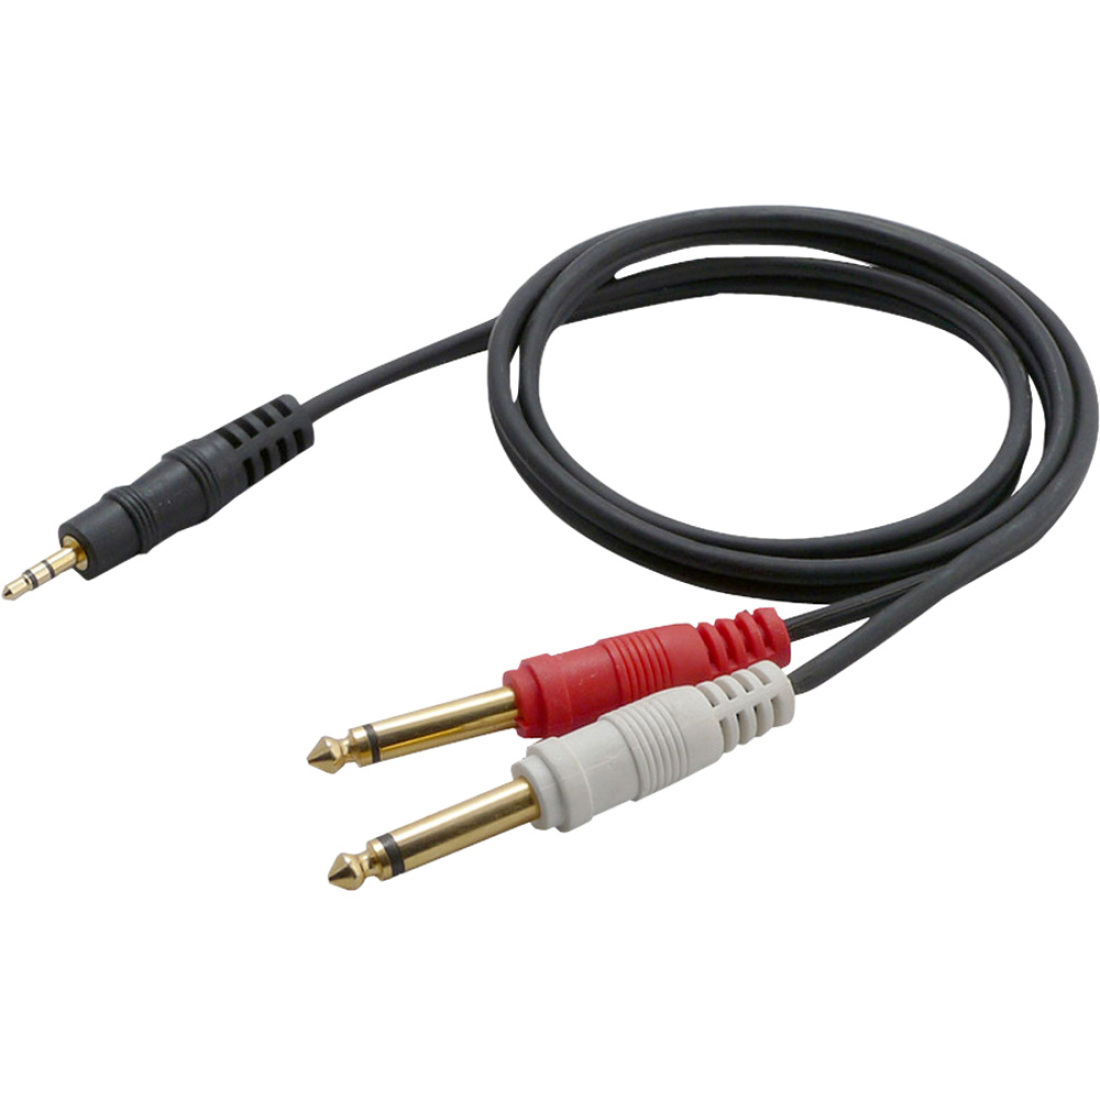 Pyle-Pro PCBL43FT3 12 Gauge 3 Feet 3.5mm Male Stereo to Dual 1/4-Inch Male Mono Y-Cable Adapter - image 2 of 2